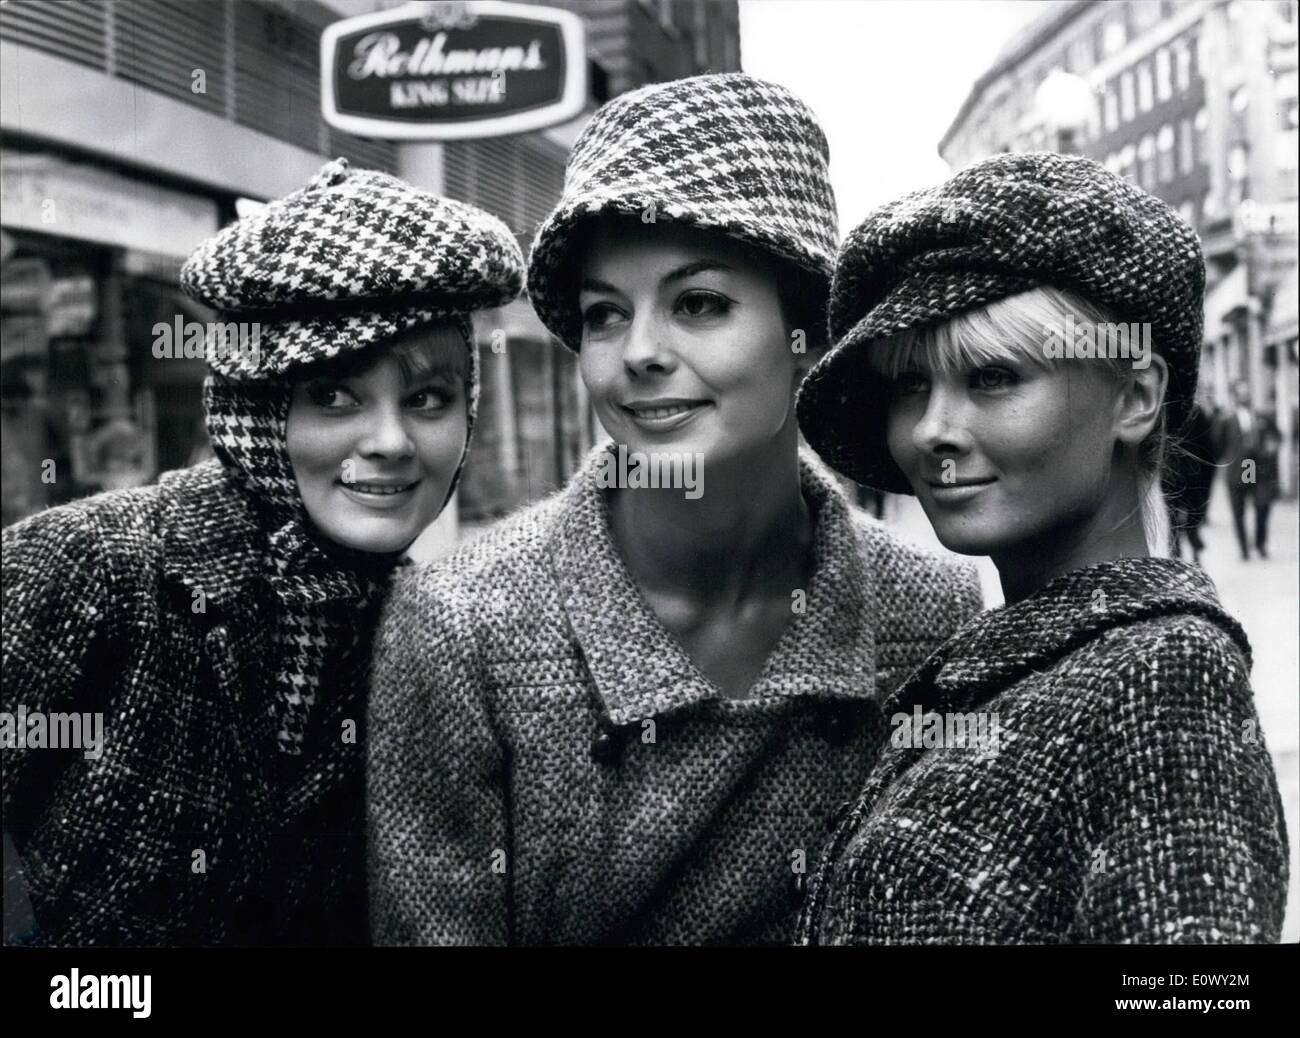 Aug. 08, 1964 - The Millinery Institute's Autumn and Winter Collection Shown at the Mayfair Hotel. Photo Shows: Models (L. to R.) June Fry, Jill Wright and Jenny Wilson, wearing a collection of hats called Tomboy, with its own matching balaclava. Stock Photo